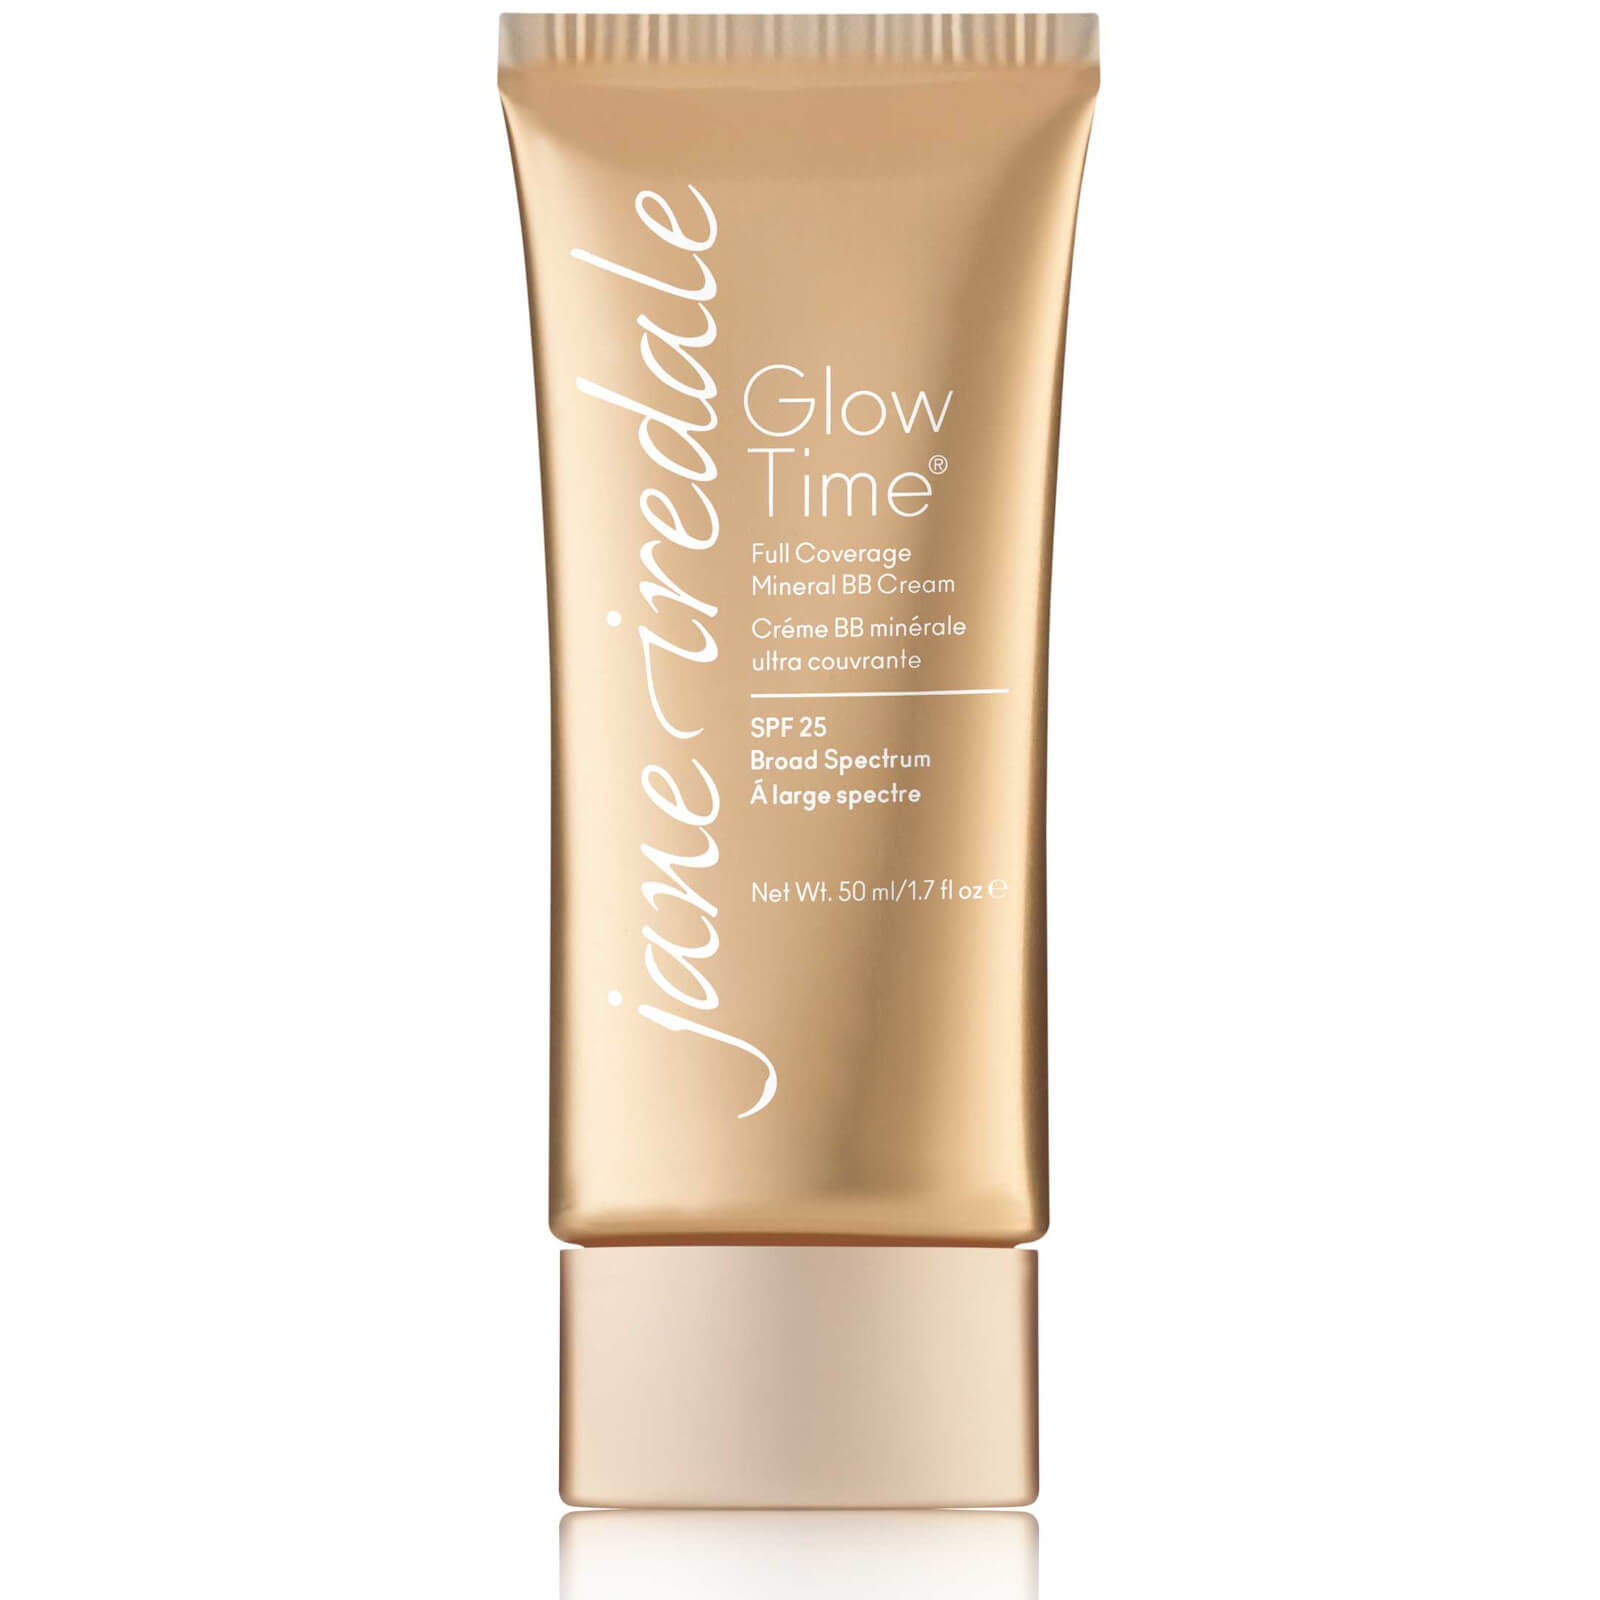 jane iredale Glow Time Full Coverage Mineral BB Cream 50ml (Various Shades) - BB4 - SPF25